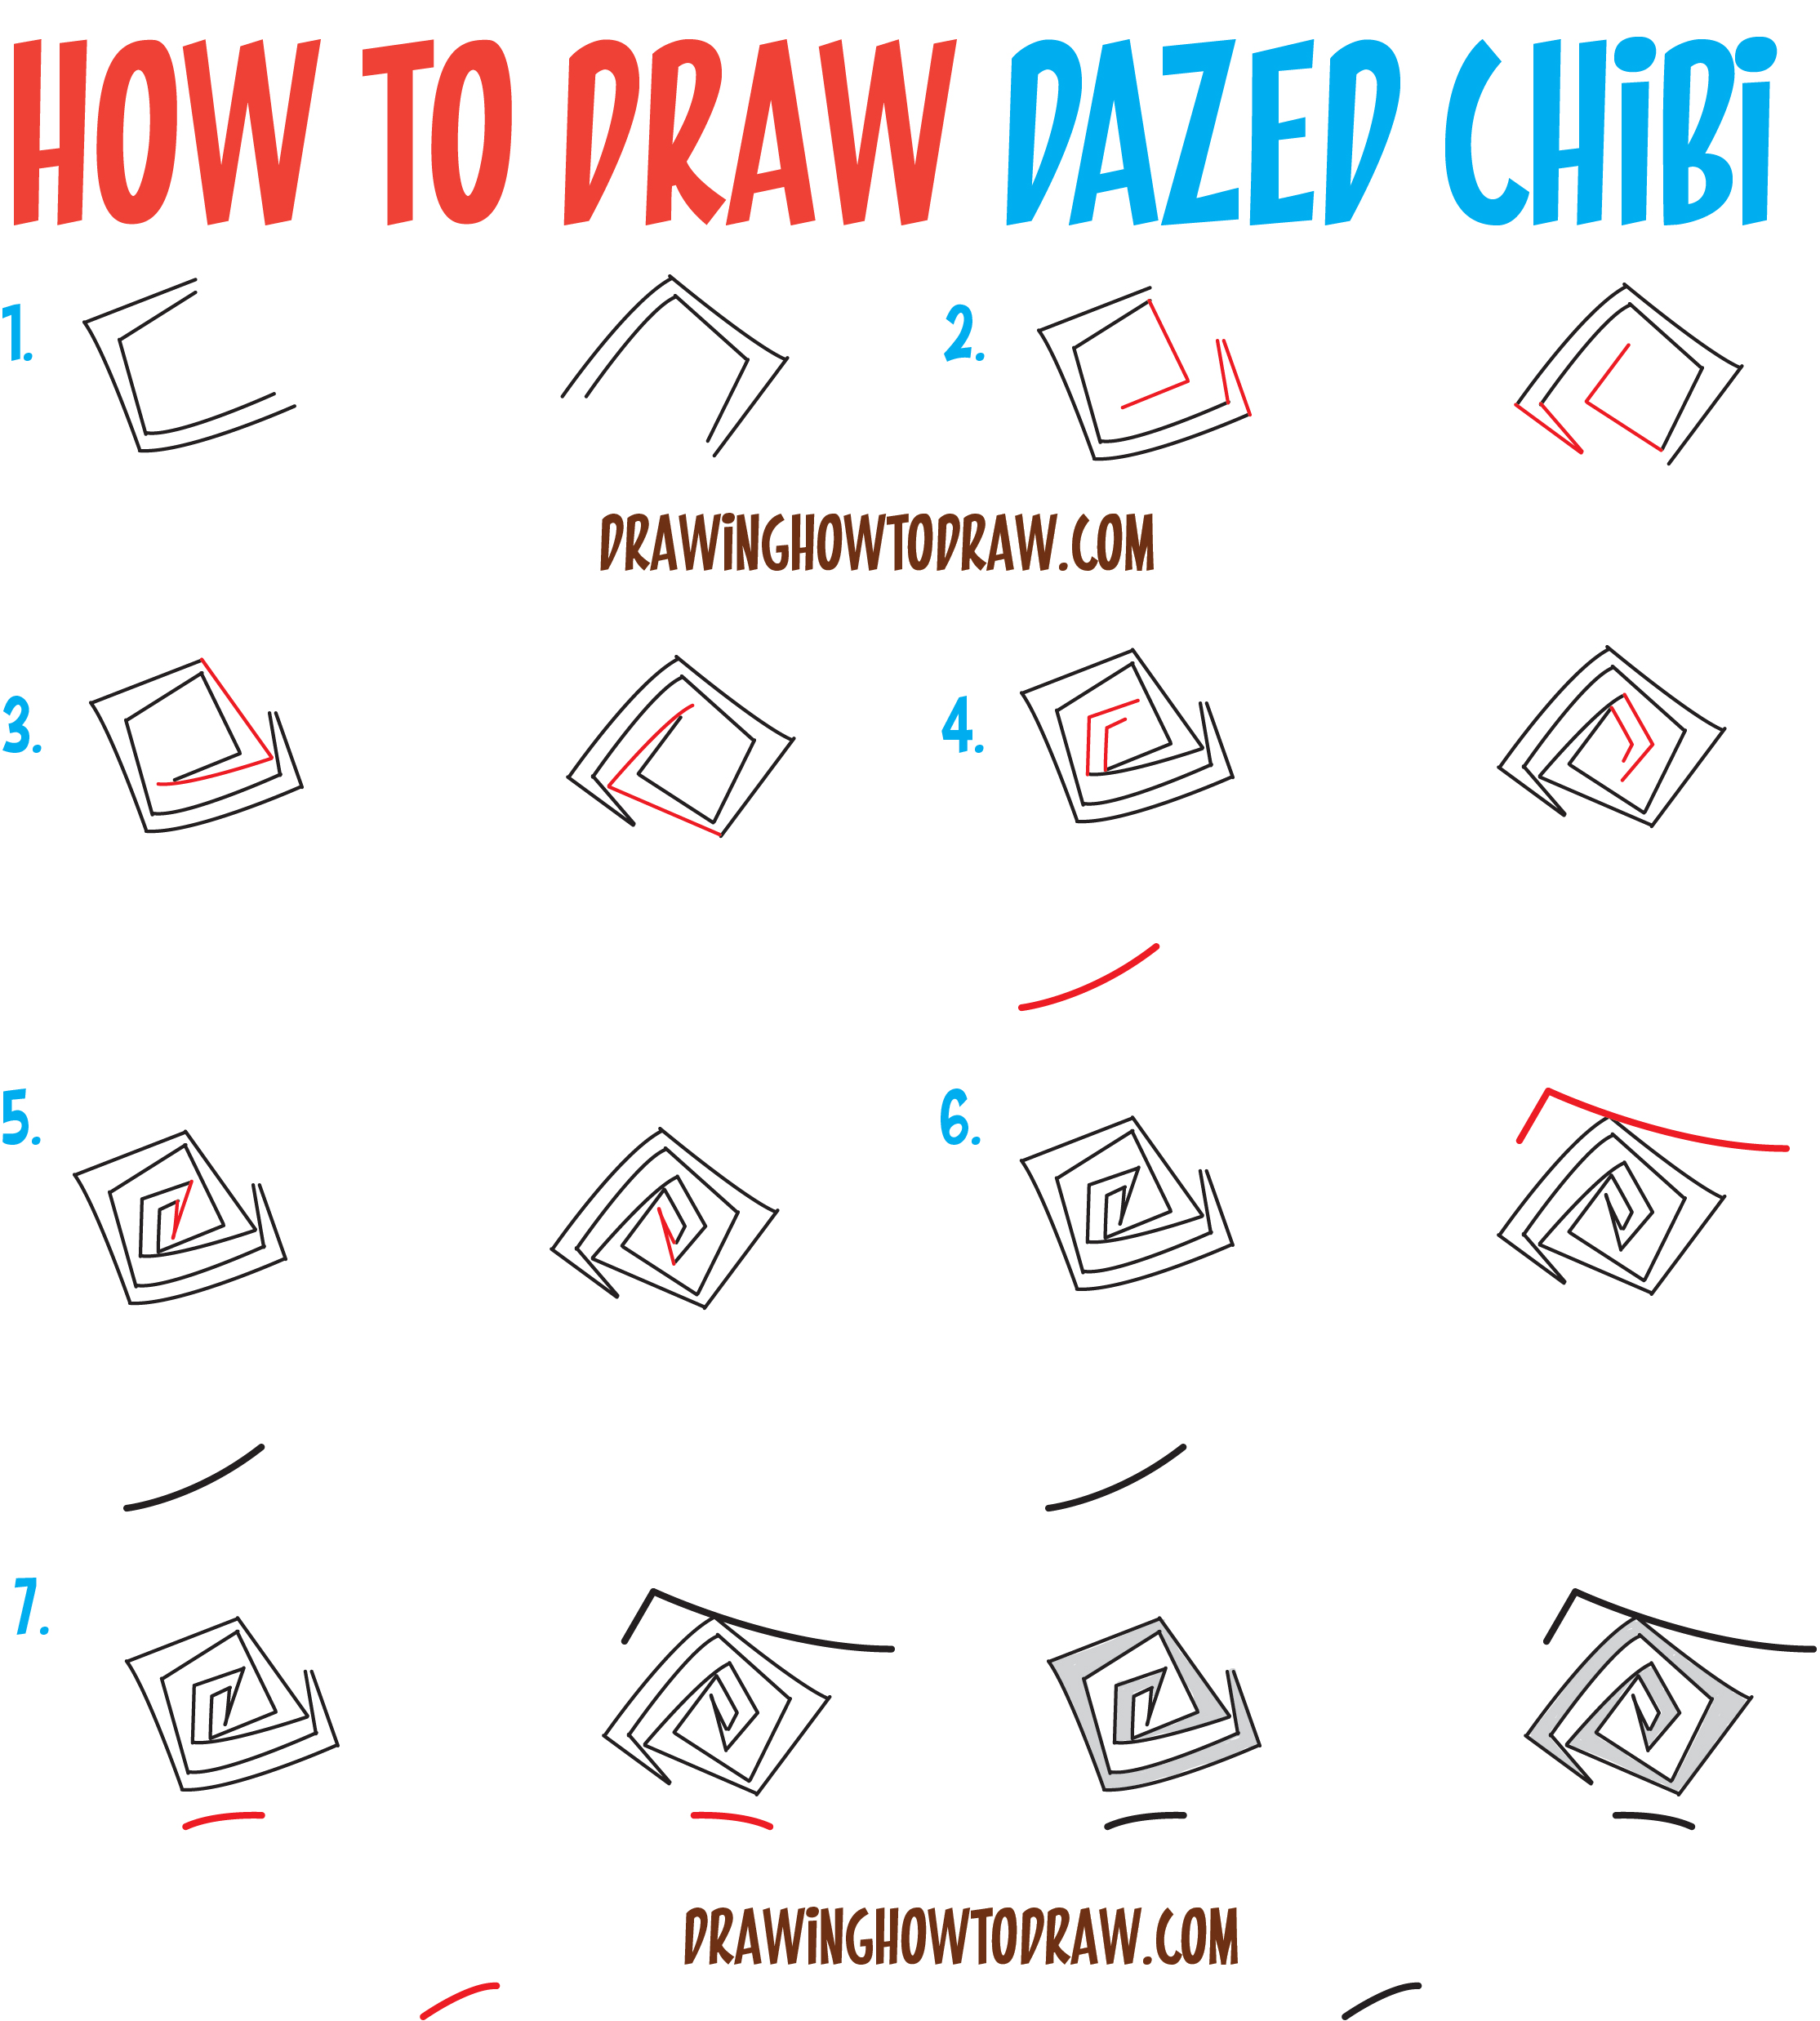 How to Draw Dazed / Confused / Surprised / Shocked / Scared Chibi Expressions and Emotions - Easy Steps Drawing Tutorial for Beginners